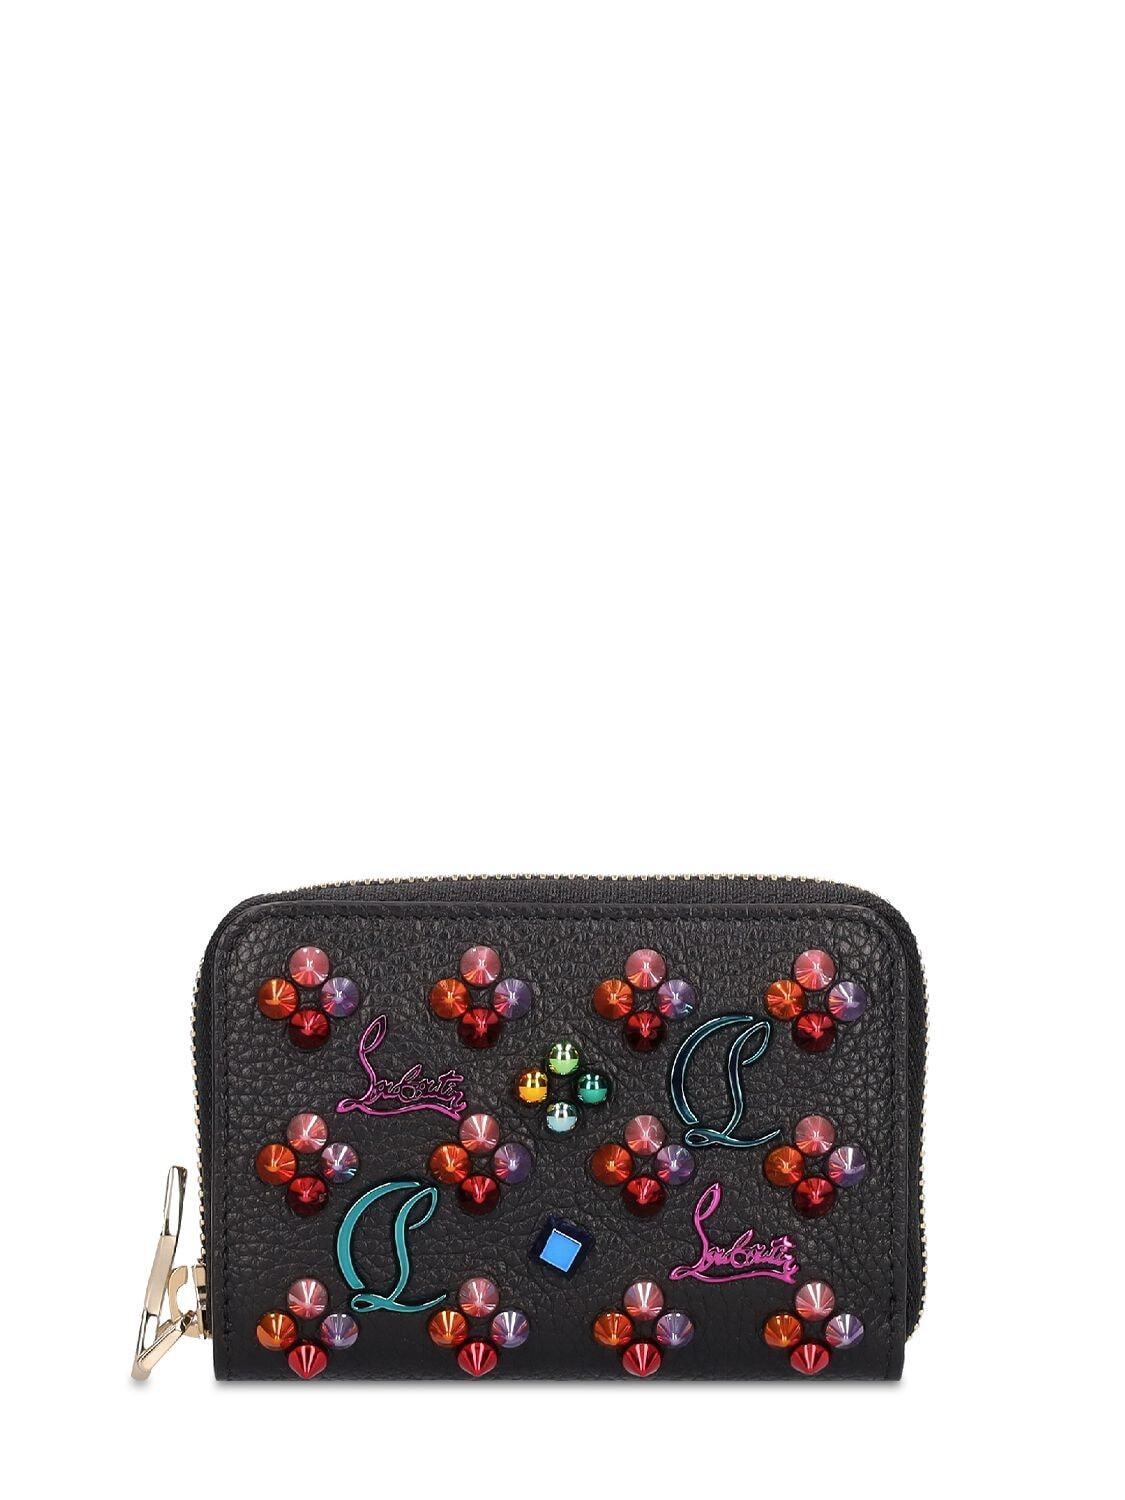 CHRISTIAN LOUBOUTIN W Panettone Leather Coin Wallet in black / multi